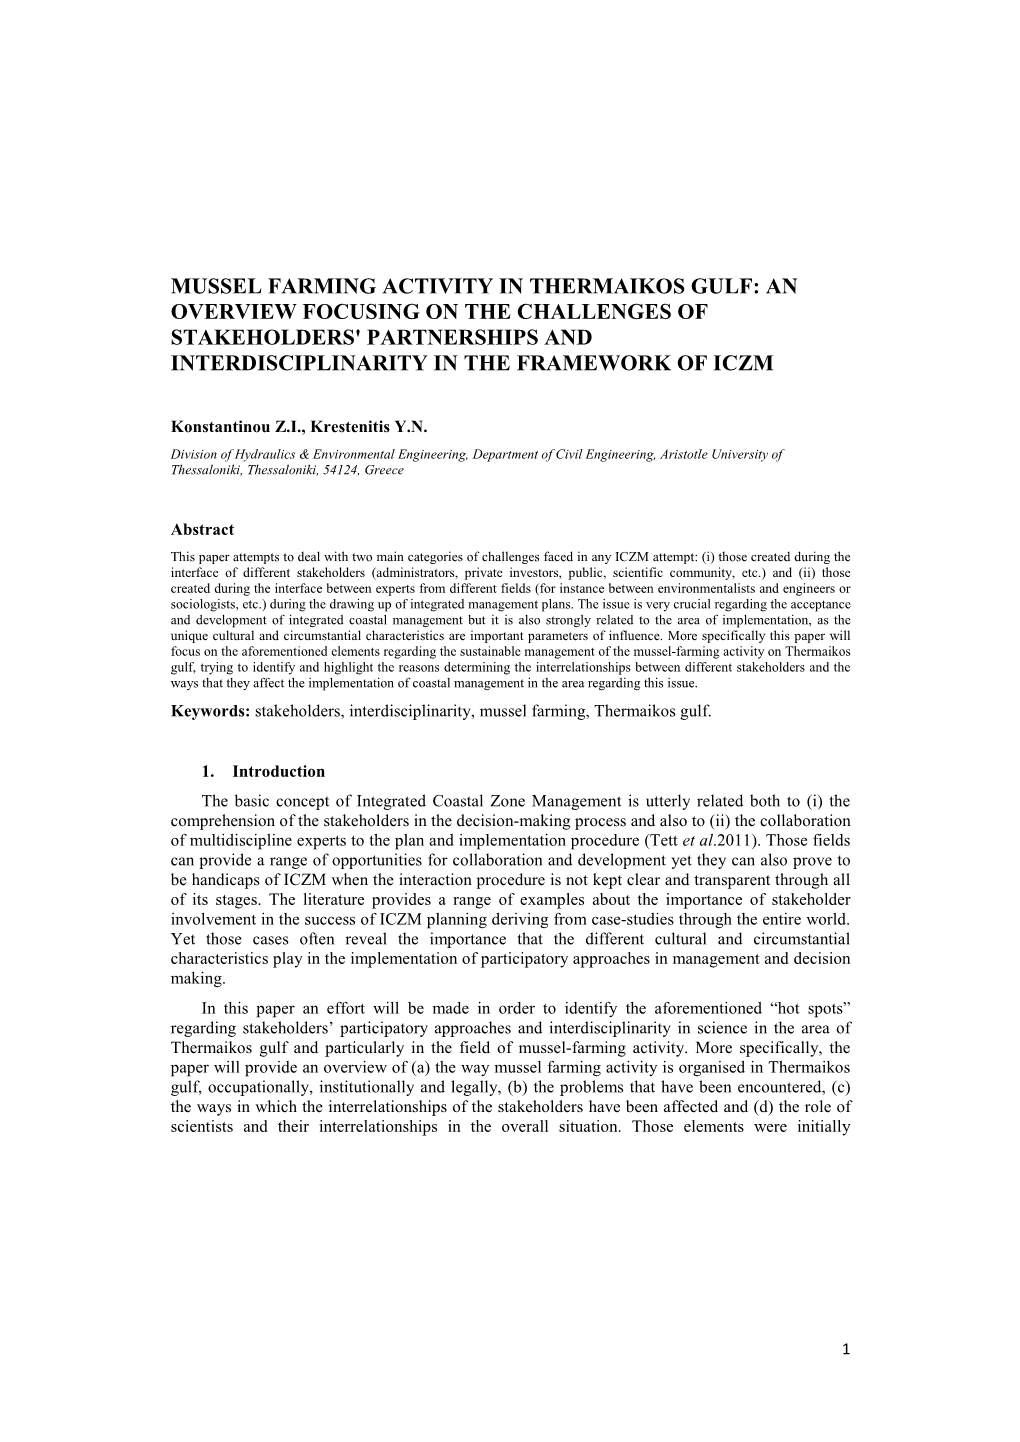 Mussel Farming Activity in Thermaikos Gulf: an Overview Focusing on the Challenges of Stakeholders' Partnerships and Interdisciplinarity in the Framework of Iczm